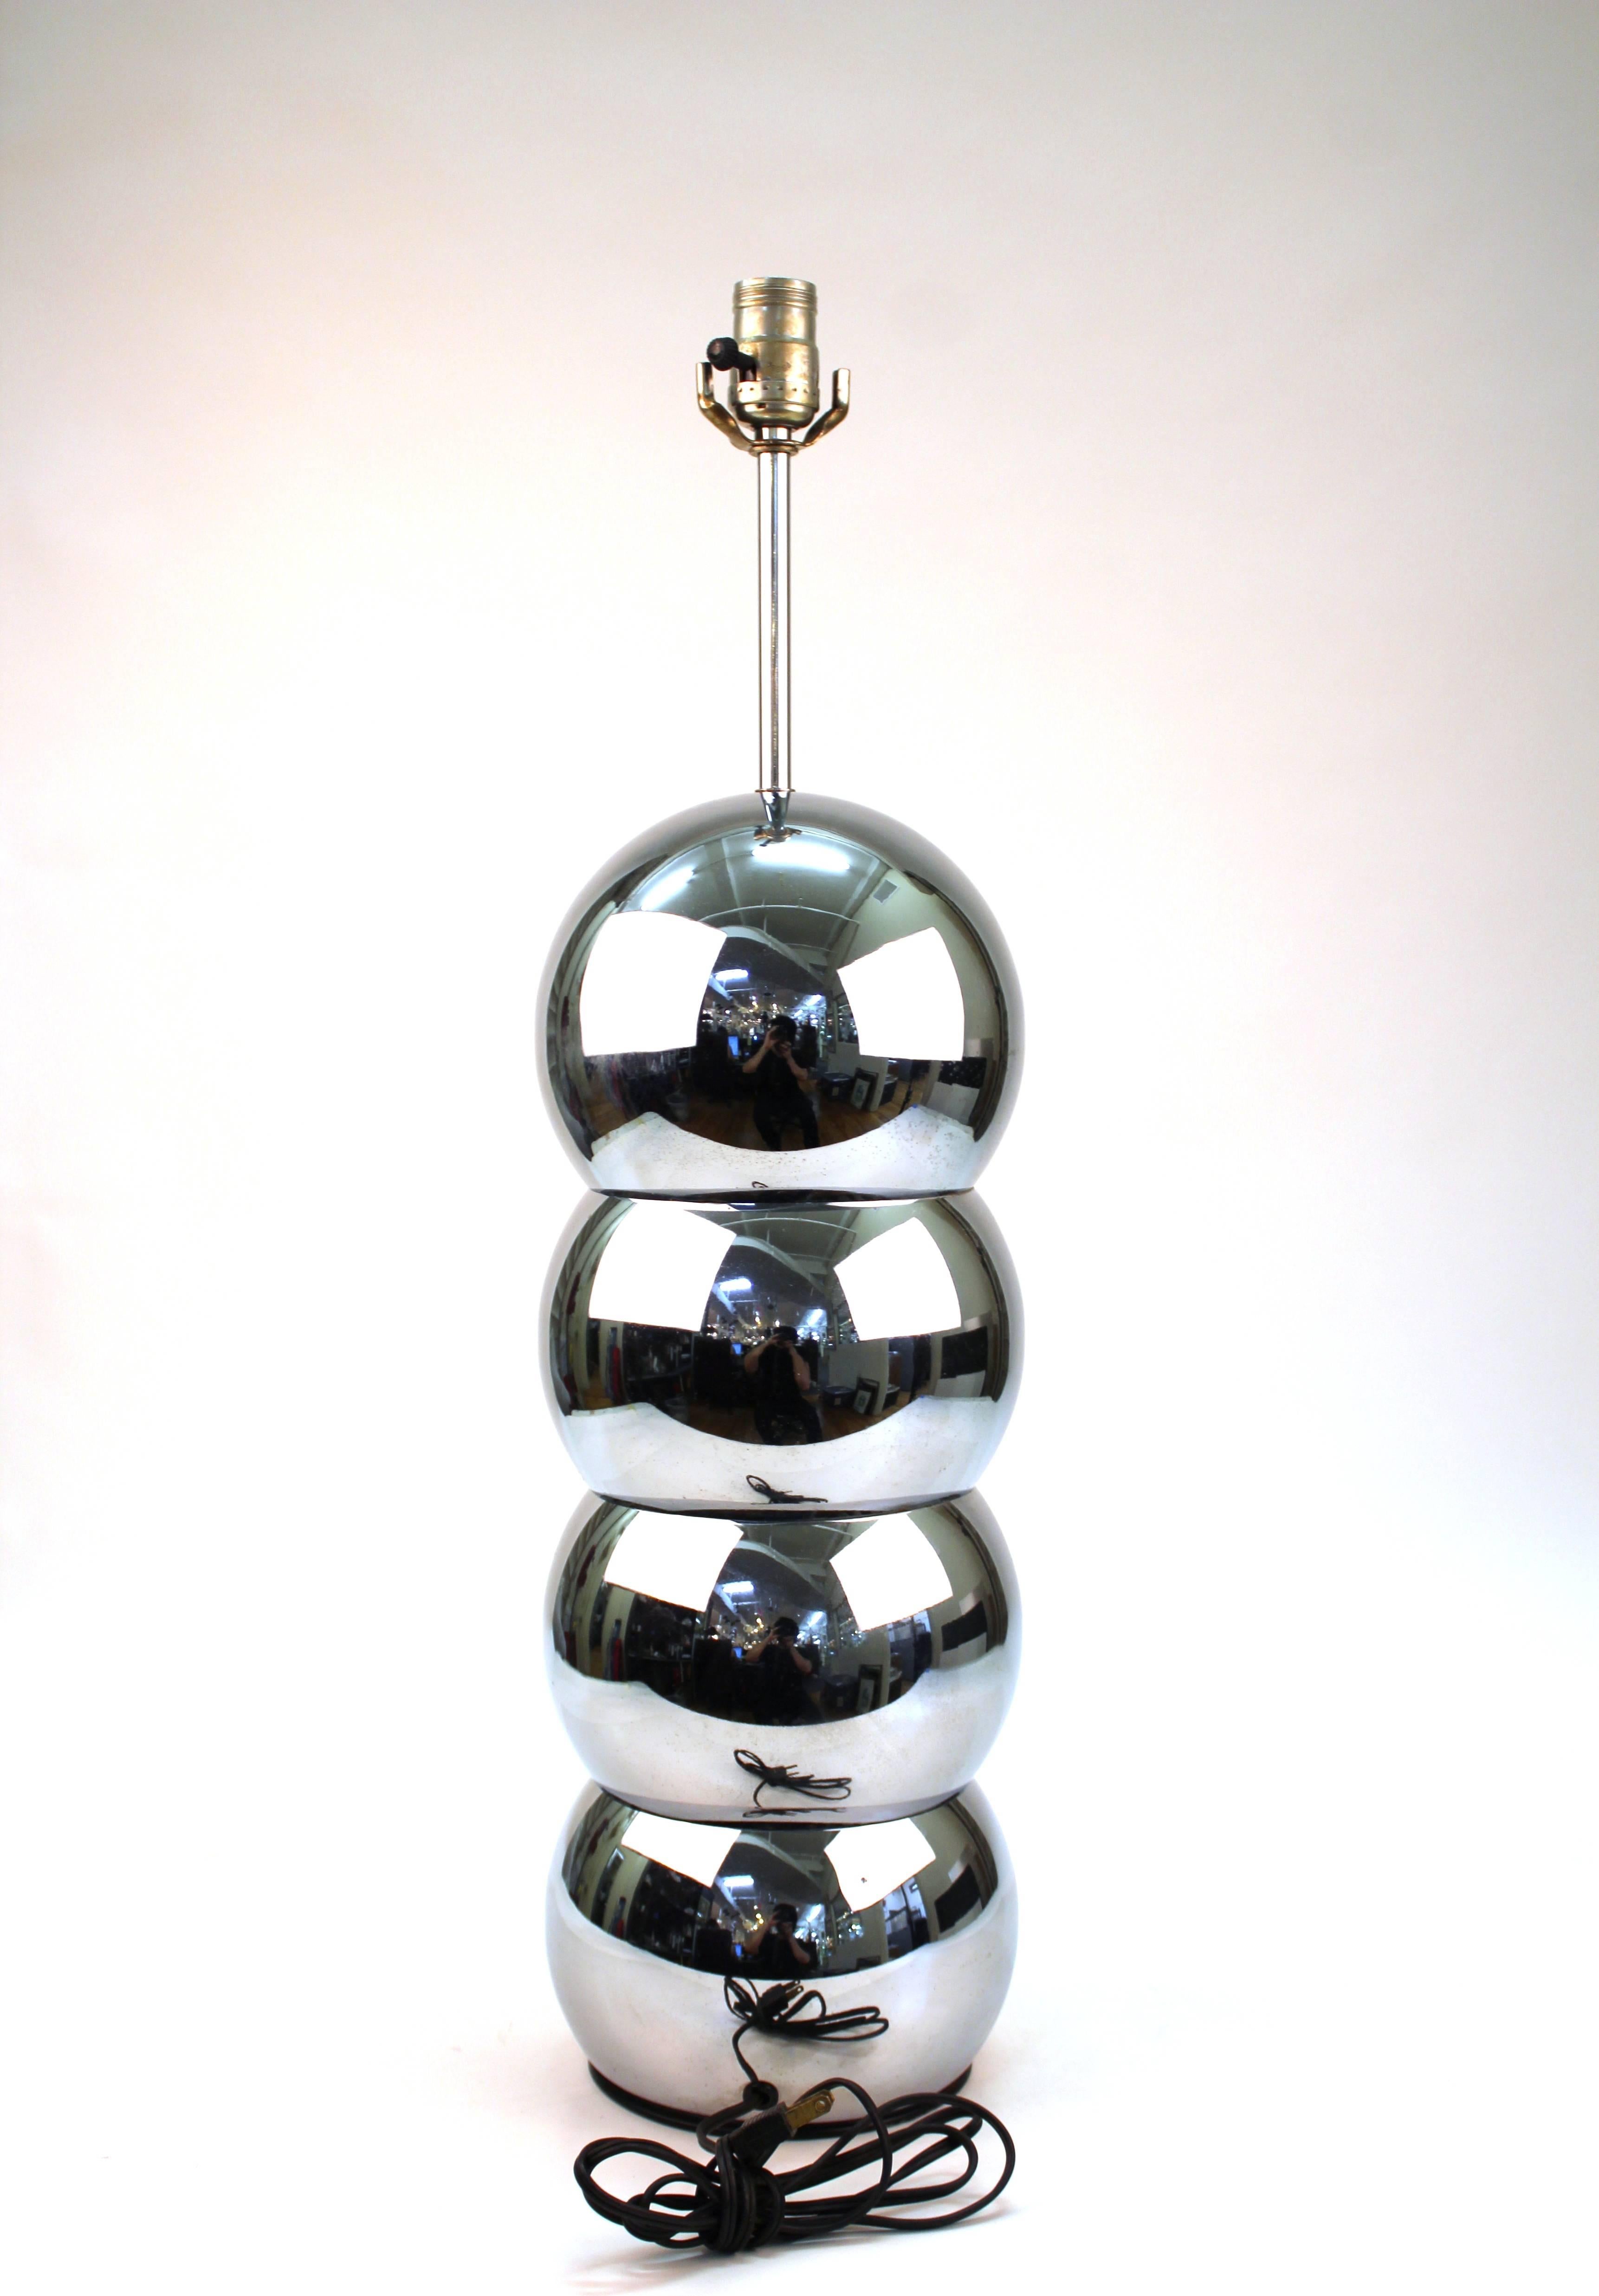 Table lamps in the form of four stacked spheres. Each has a high polished chrome finish. Wear appropriate to age and use with some scratches to finish. The lamps remain in good vintage condition.